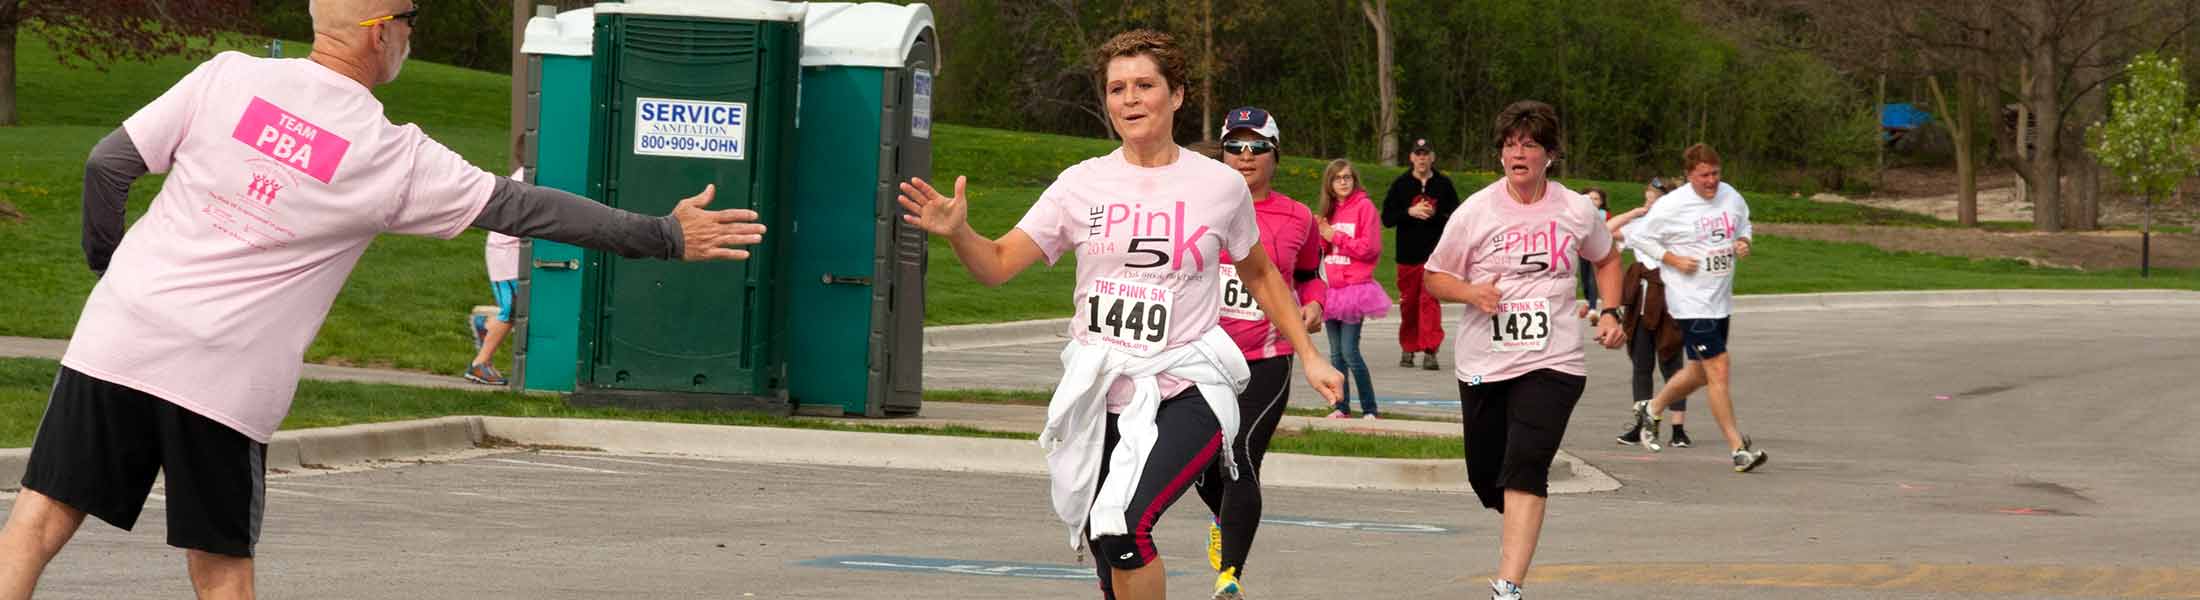 PBA employees encourage their coworkers as they run the Pink 5k